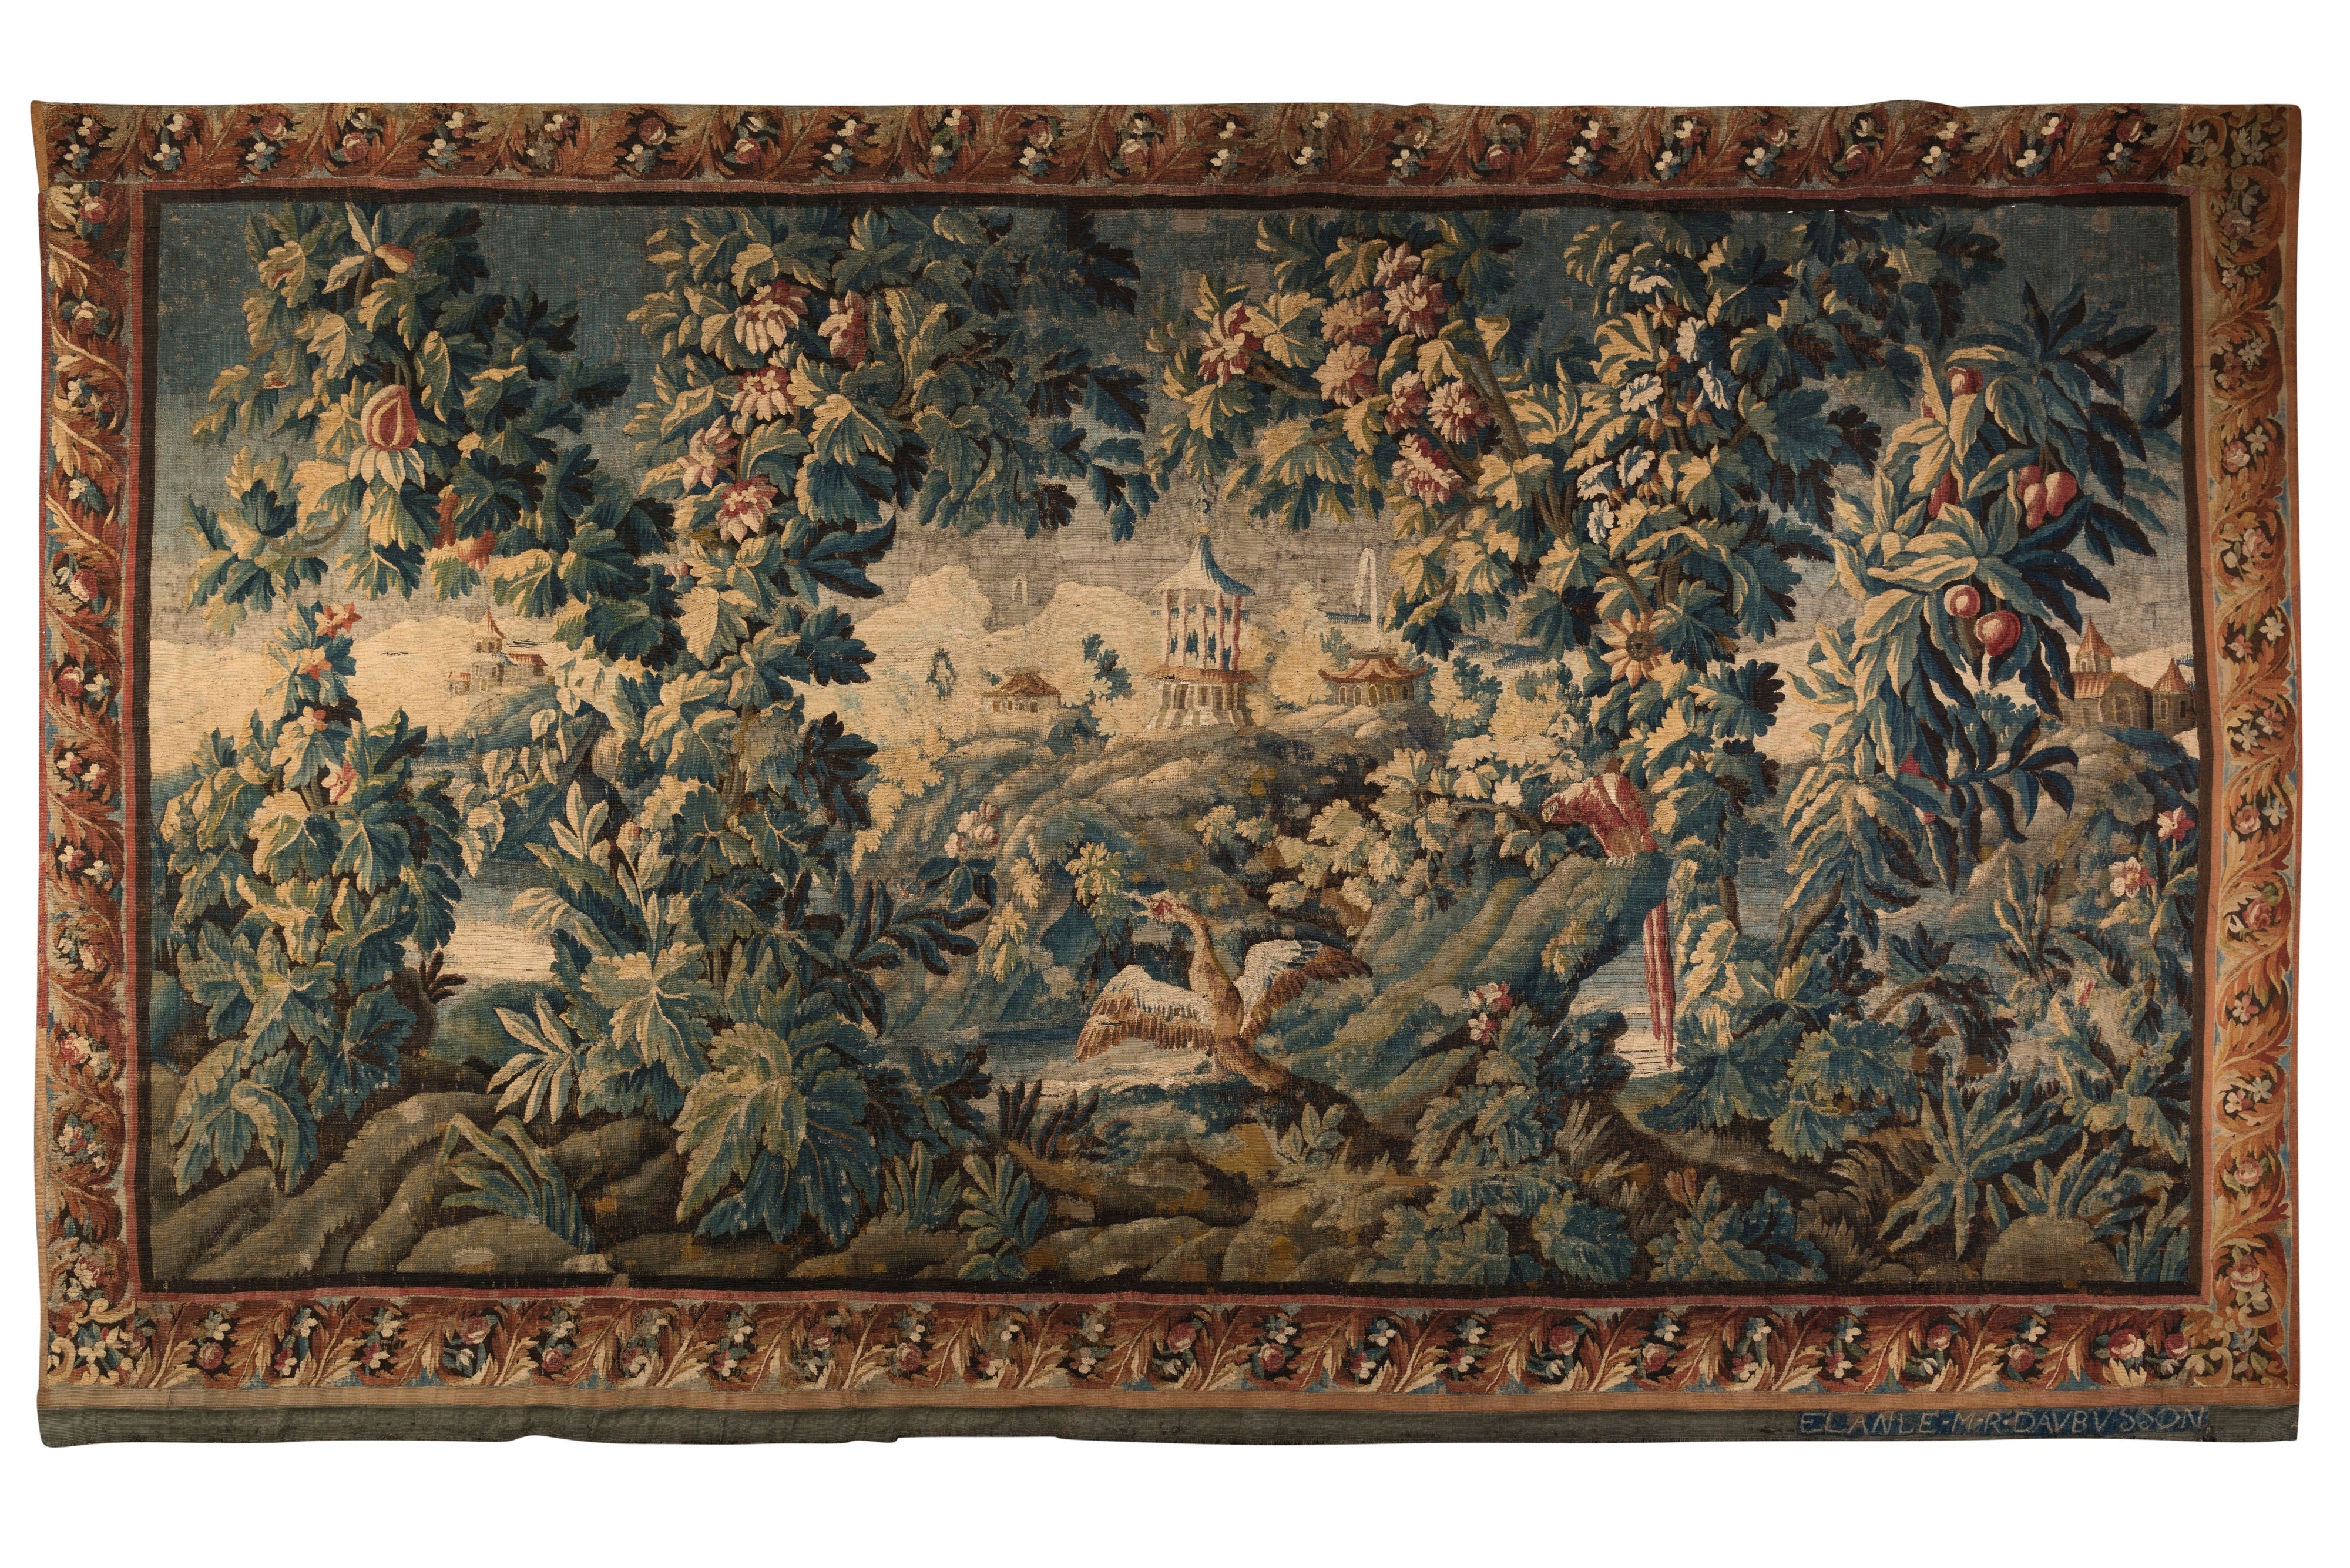 A Signed Late 17th – Early 18th Century Aubusson Verdure Tapestry